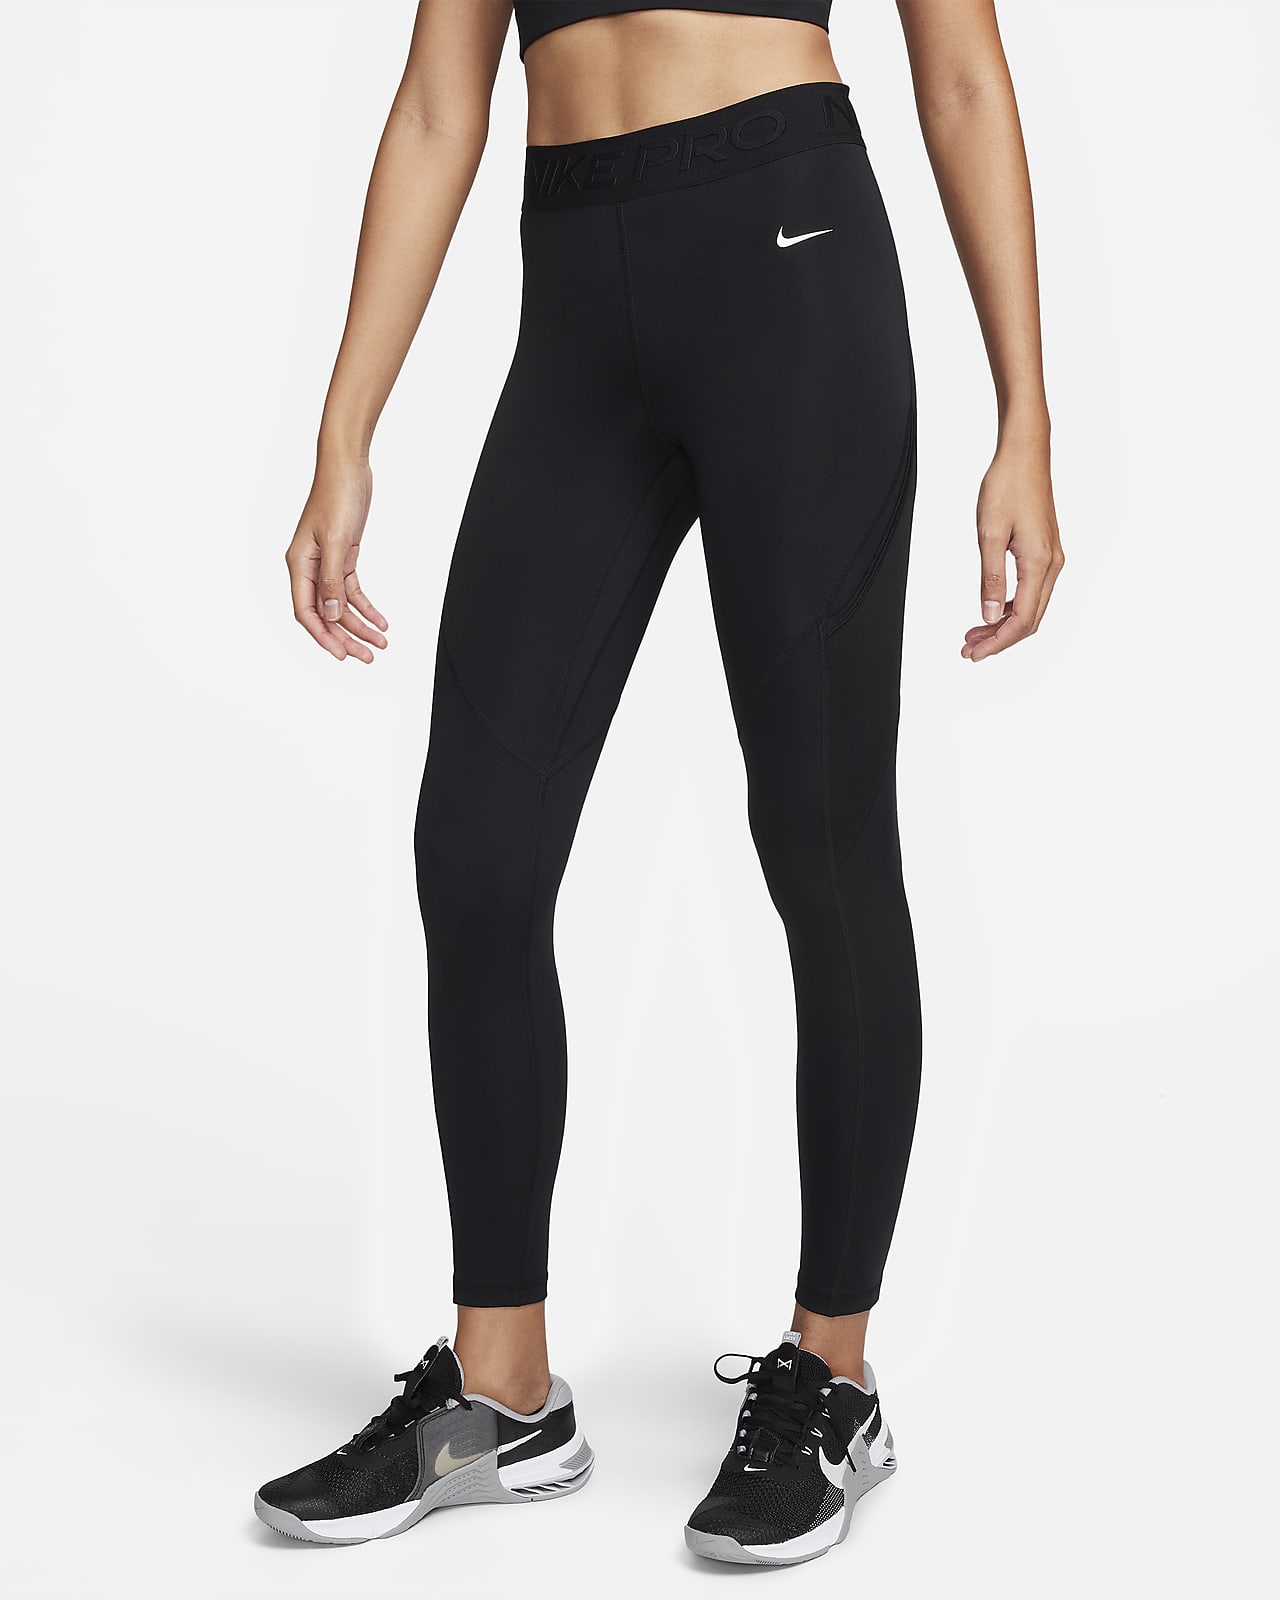 Nike Pro Women's Mid-Rise 7/8 Leggings with Pockets.